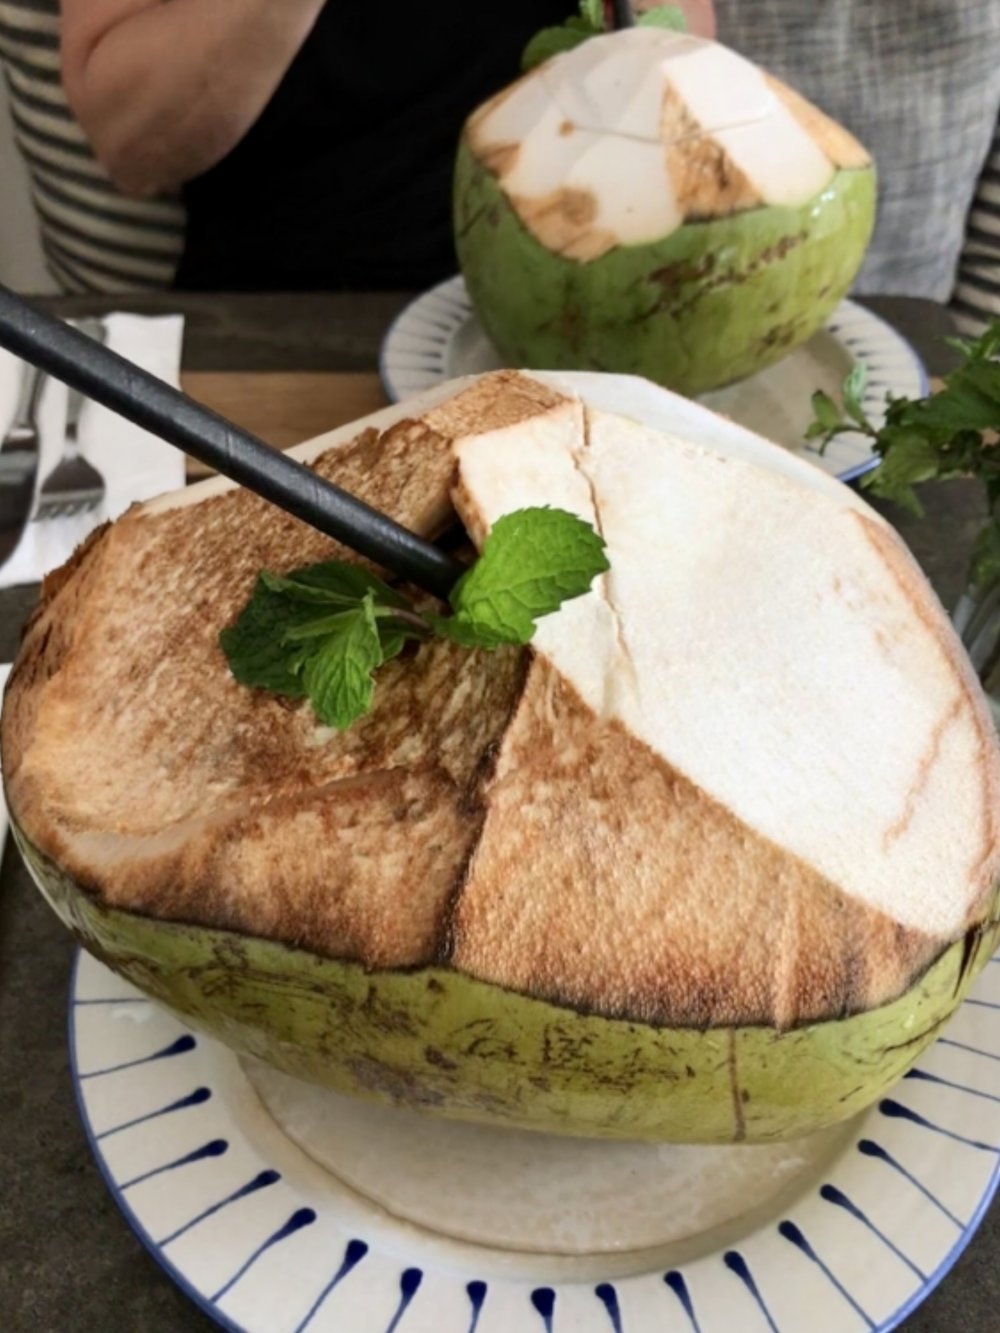 These giant coconuts were the perfect way to quench your thirst after a day of yoga or beach